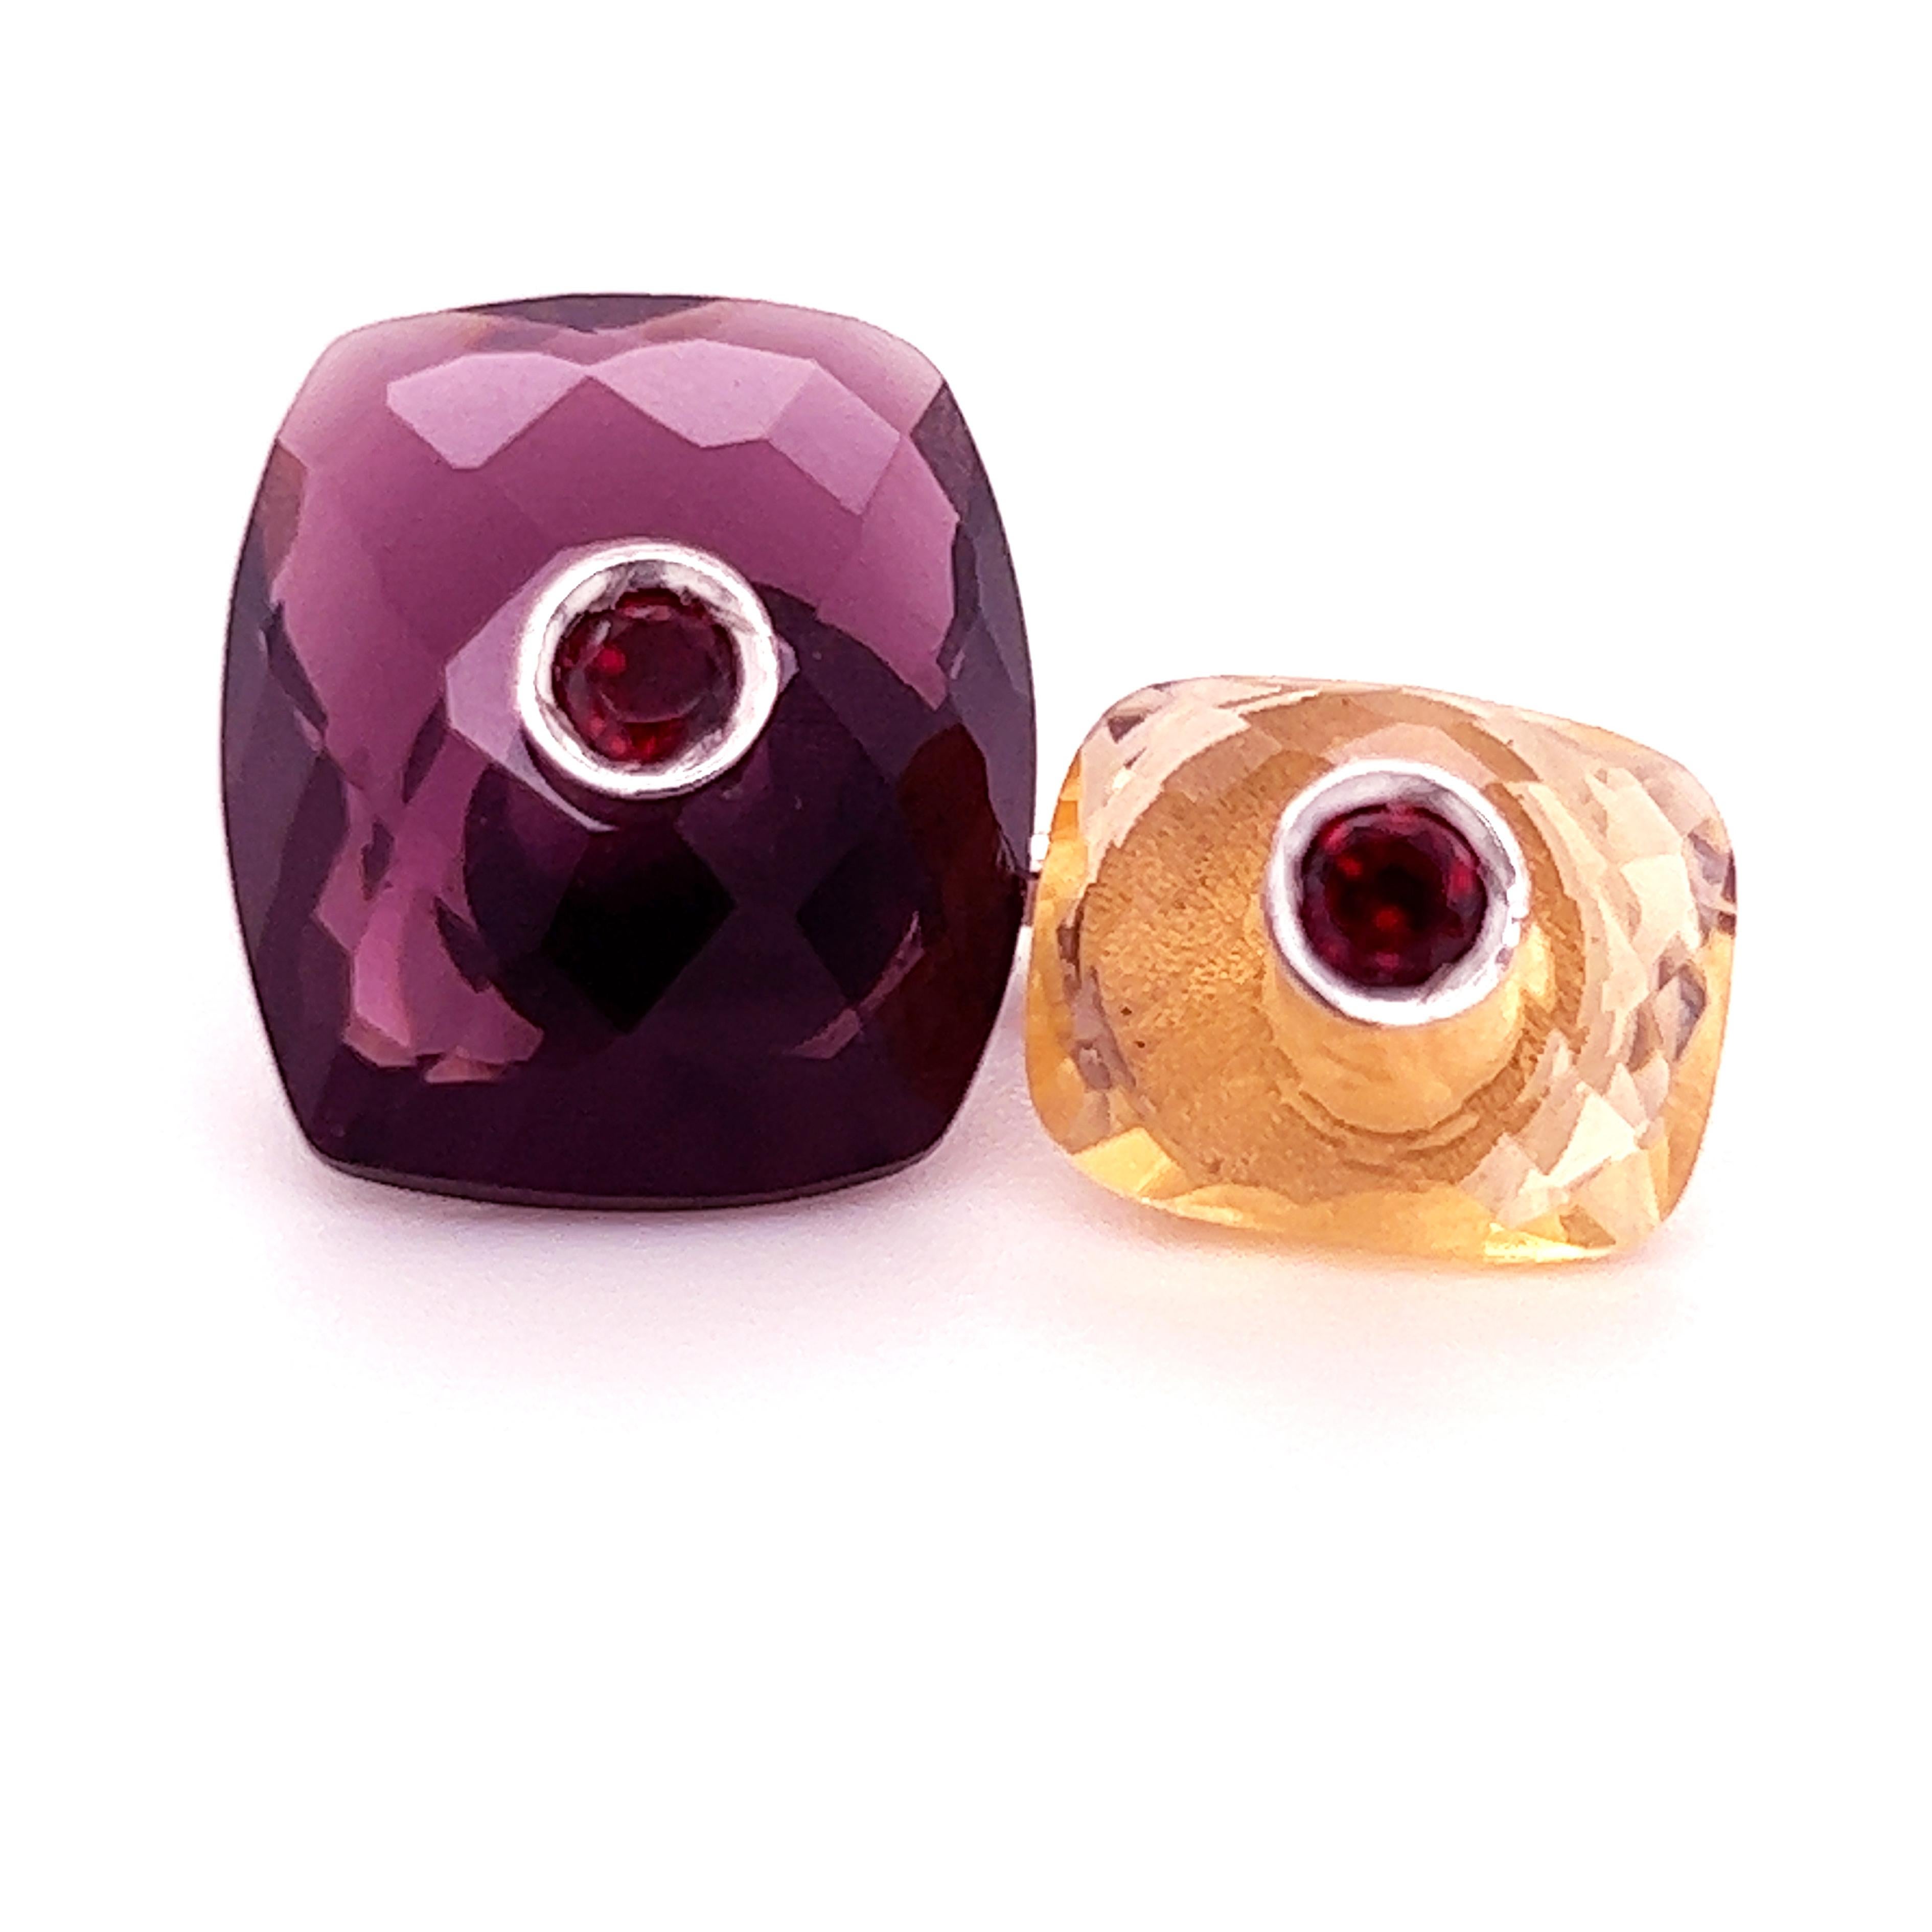 Unique, Chic yet Timeless 0.32 Carat Round Ruby Brilliant Cut in an 18.68 Carat Hand Inlaid Double Faceted  Amethyst and Citrine Quartz White Gold Setting Cufflinks.
In our smart fitted Suede Tobacco Leather Case and Pouch.
